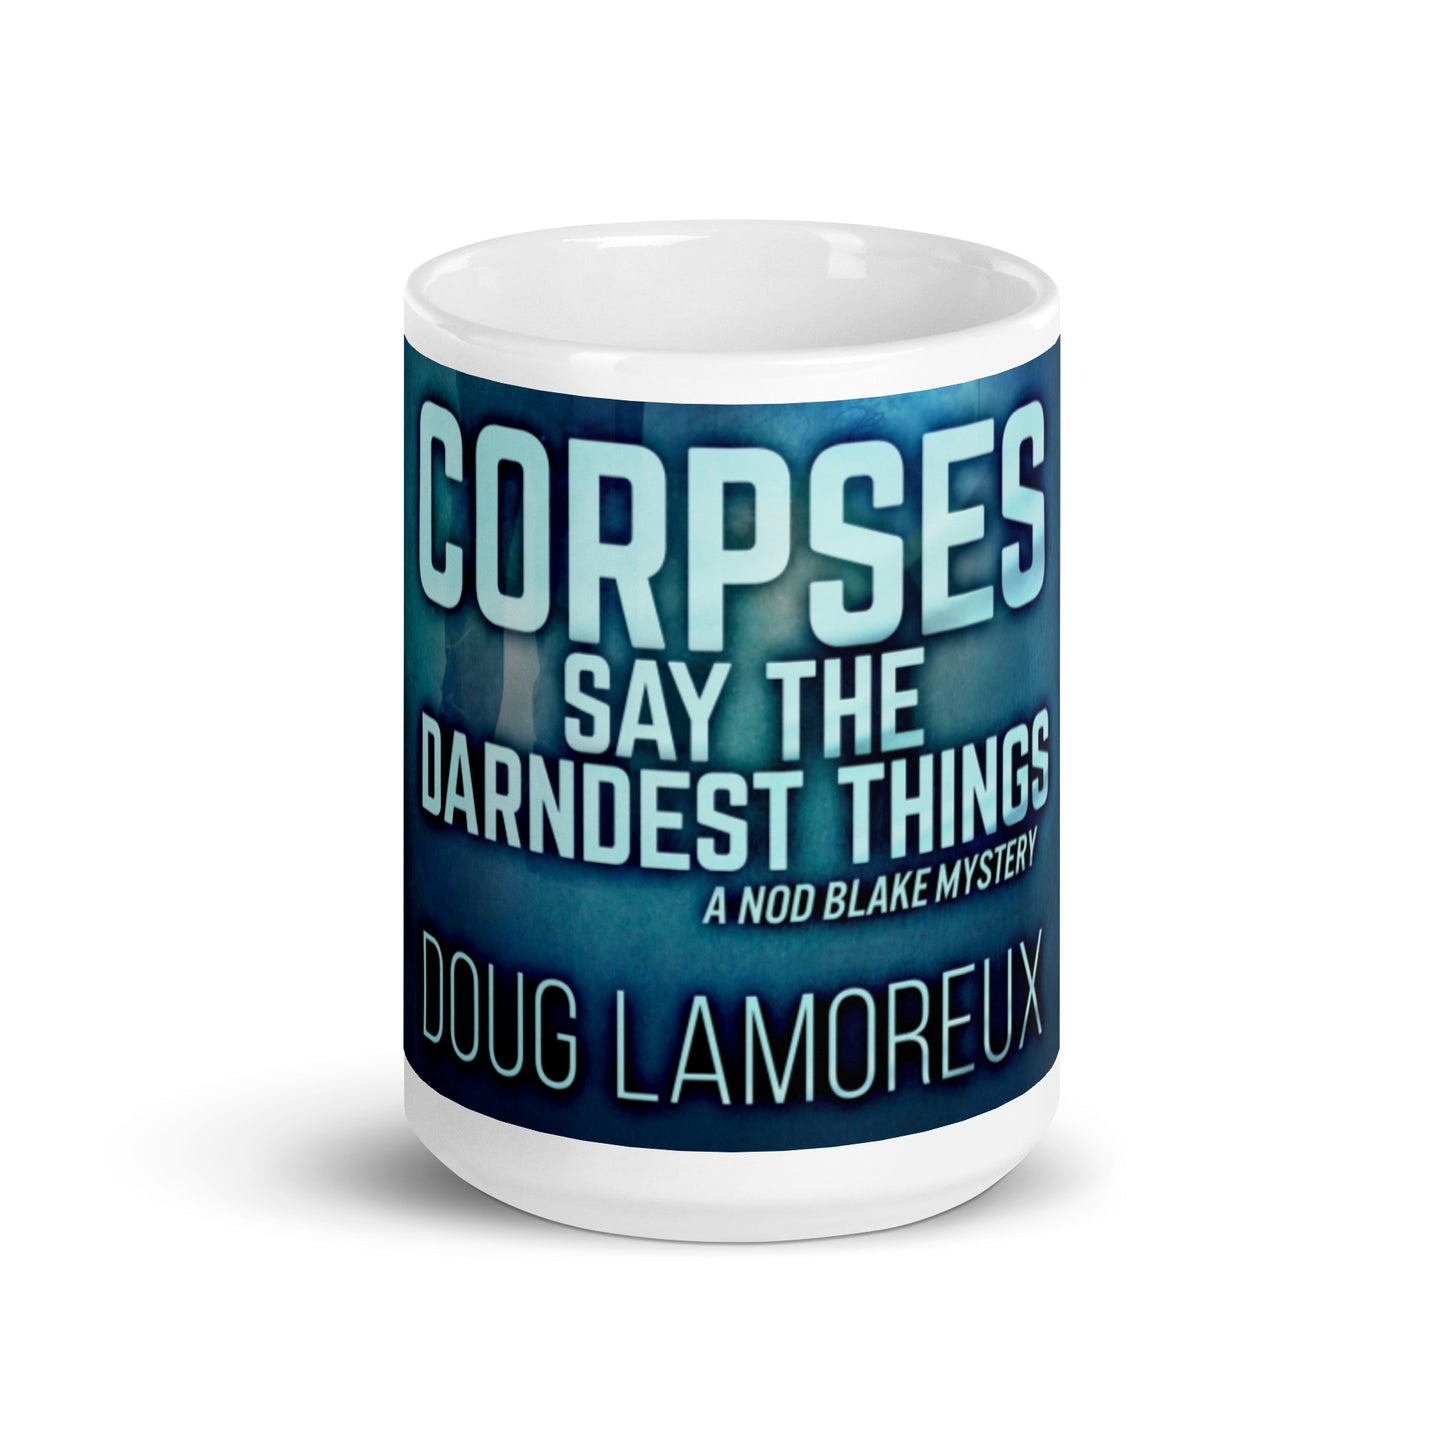 Corpses Say The Darndest Things - White Coffee Mug